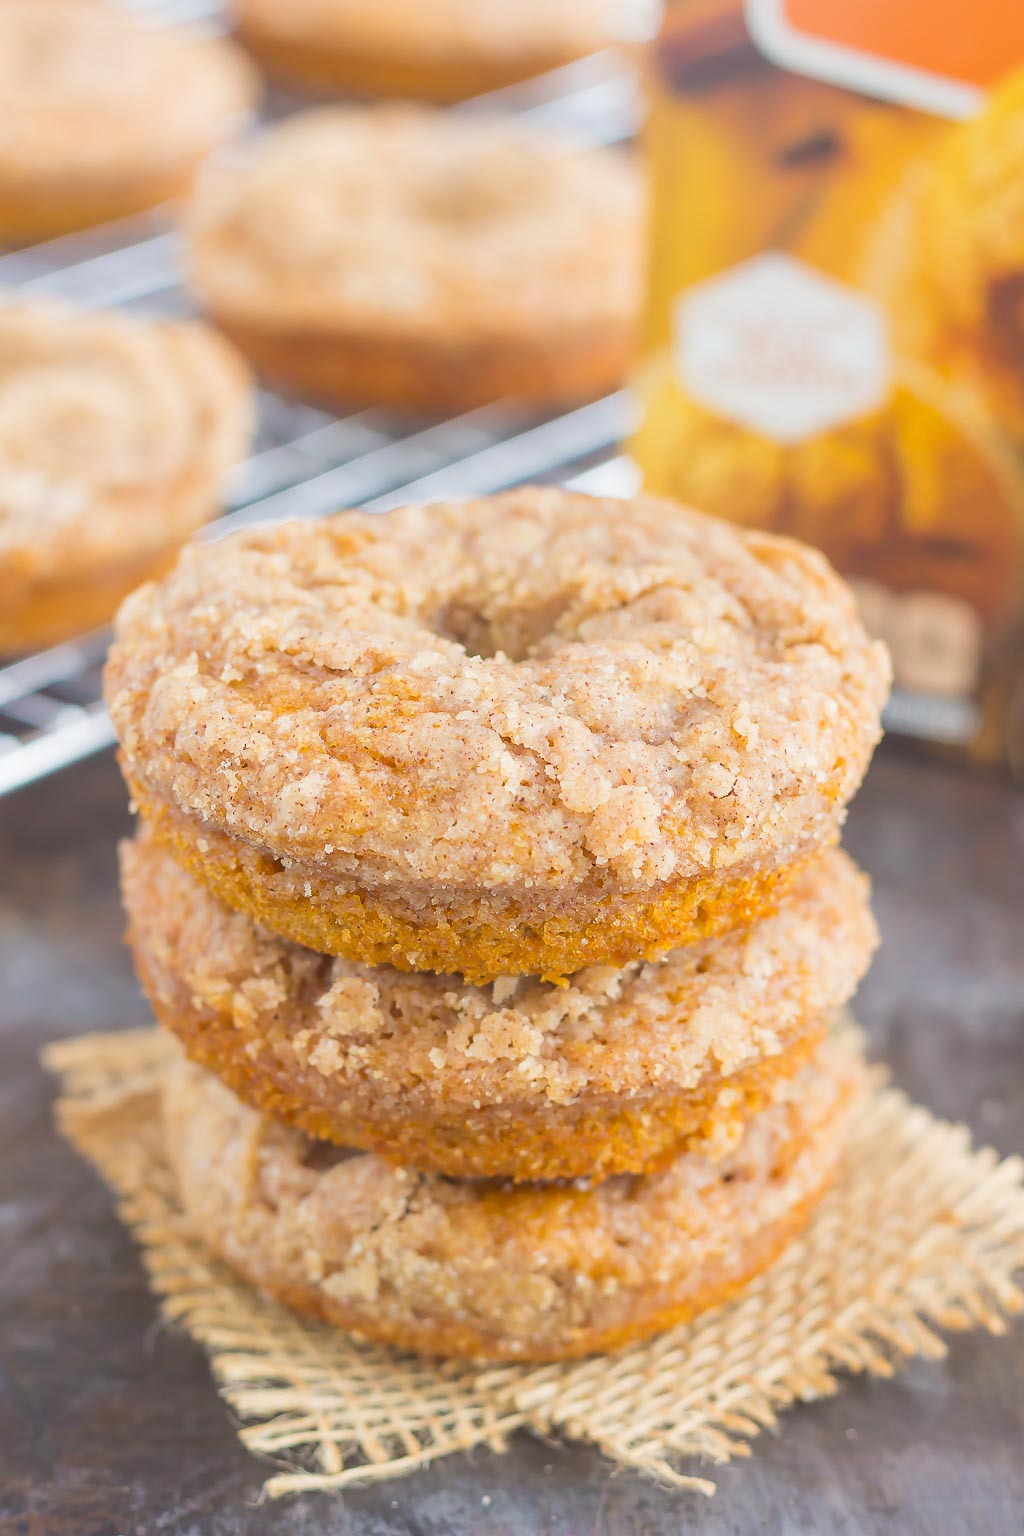 These Baked Pumpkin Streusel Donuts are soft, fluffy, and bursting with pumpkin. Filled with cozy fall flavors and topped with a sweet cinnamon streusel, this easy treat is the perfect fall breakfast or dessert! #pumpkin #pumpkindonuts #bakeddonuts #donutrecipes #fallrecipe #pumpkinrecipe #fallbreakfast #falldessert #pumpkinbreakfast #pumpkindessert #breakfast #dessert